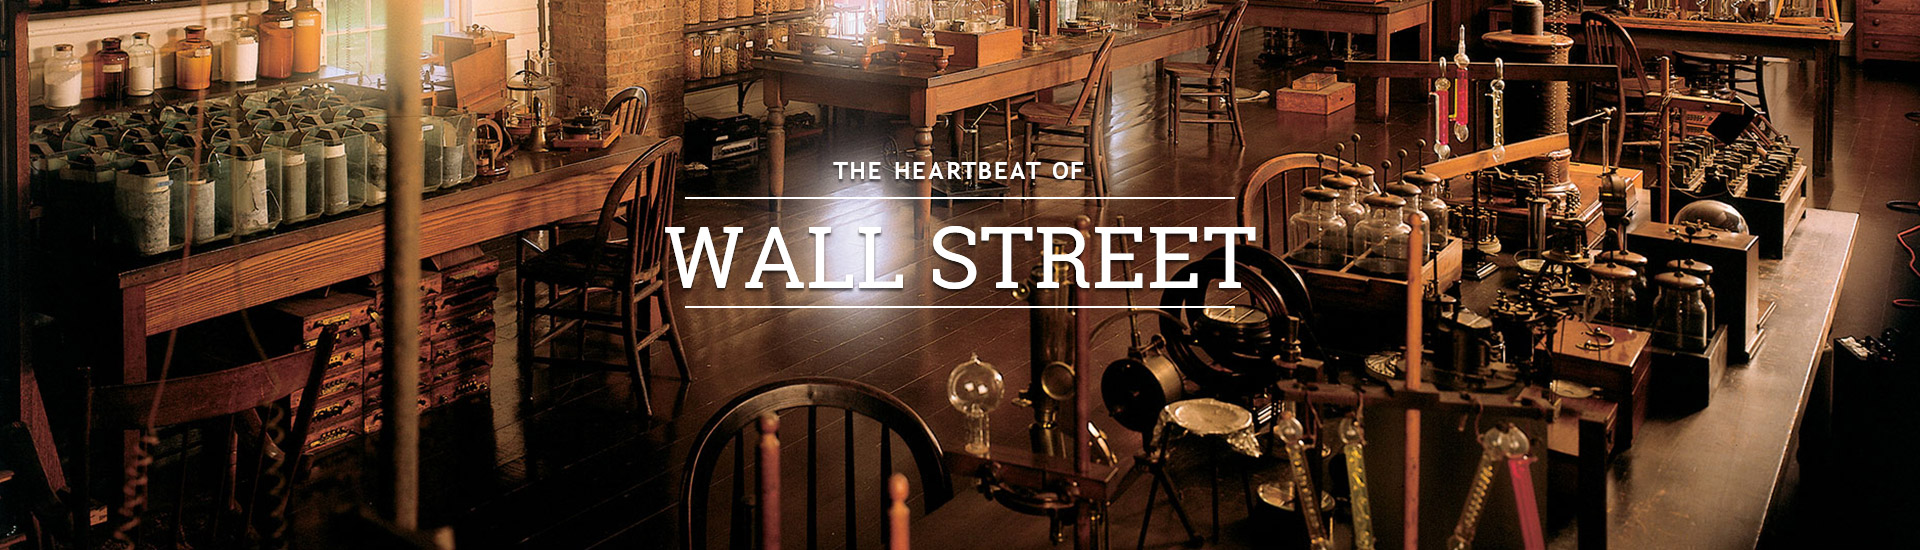 The Heartbeat of Wall Street